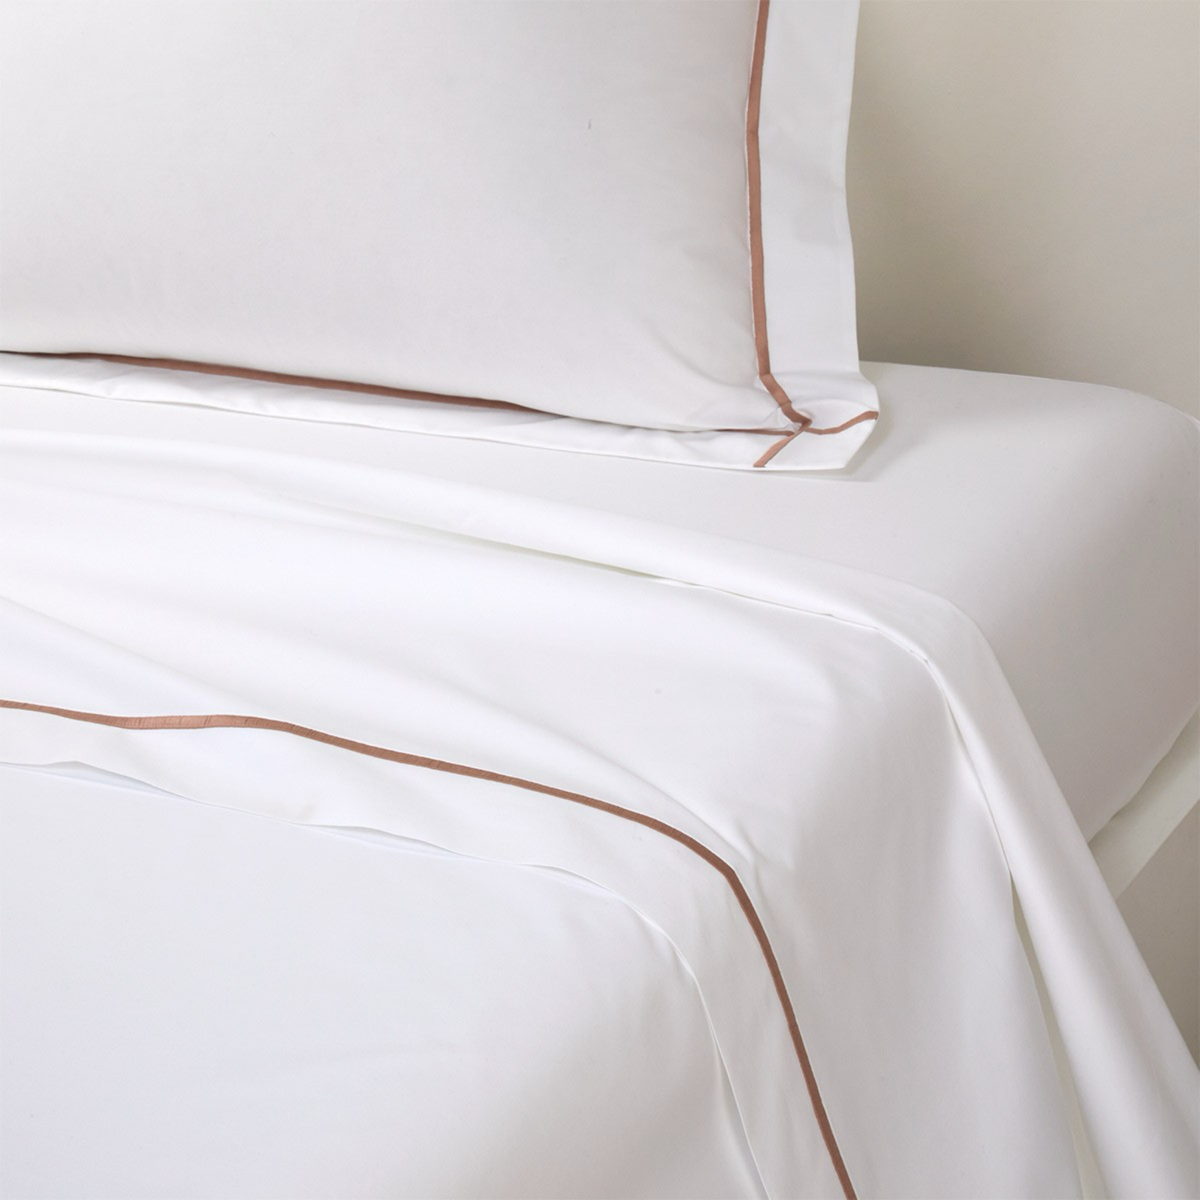 Flat Sheet of Yves Delorme Athena Bedding in Sienna Color